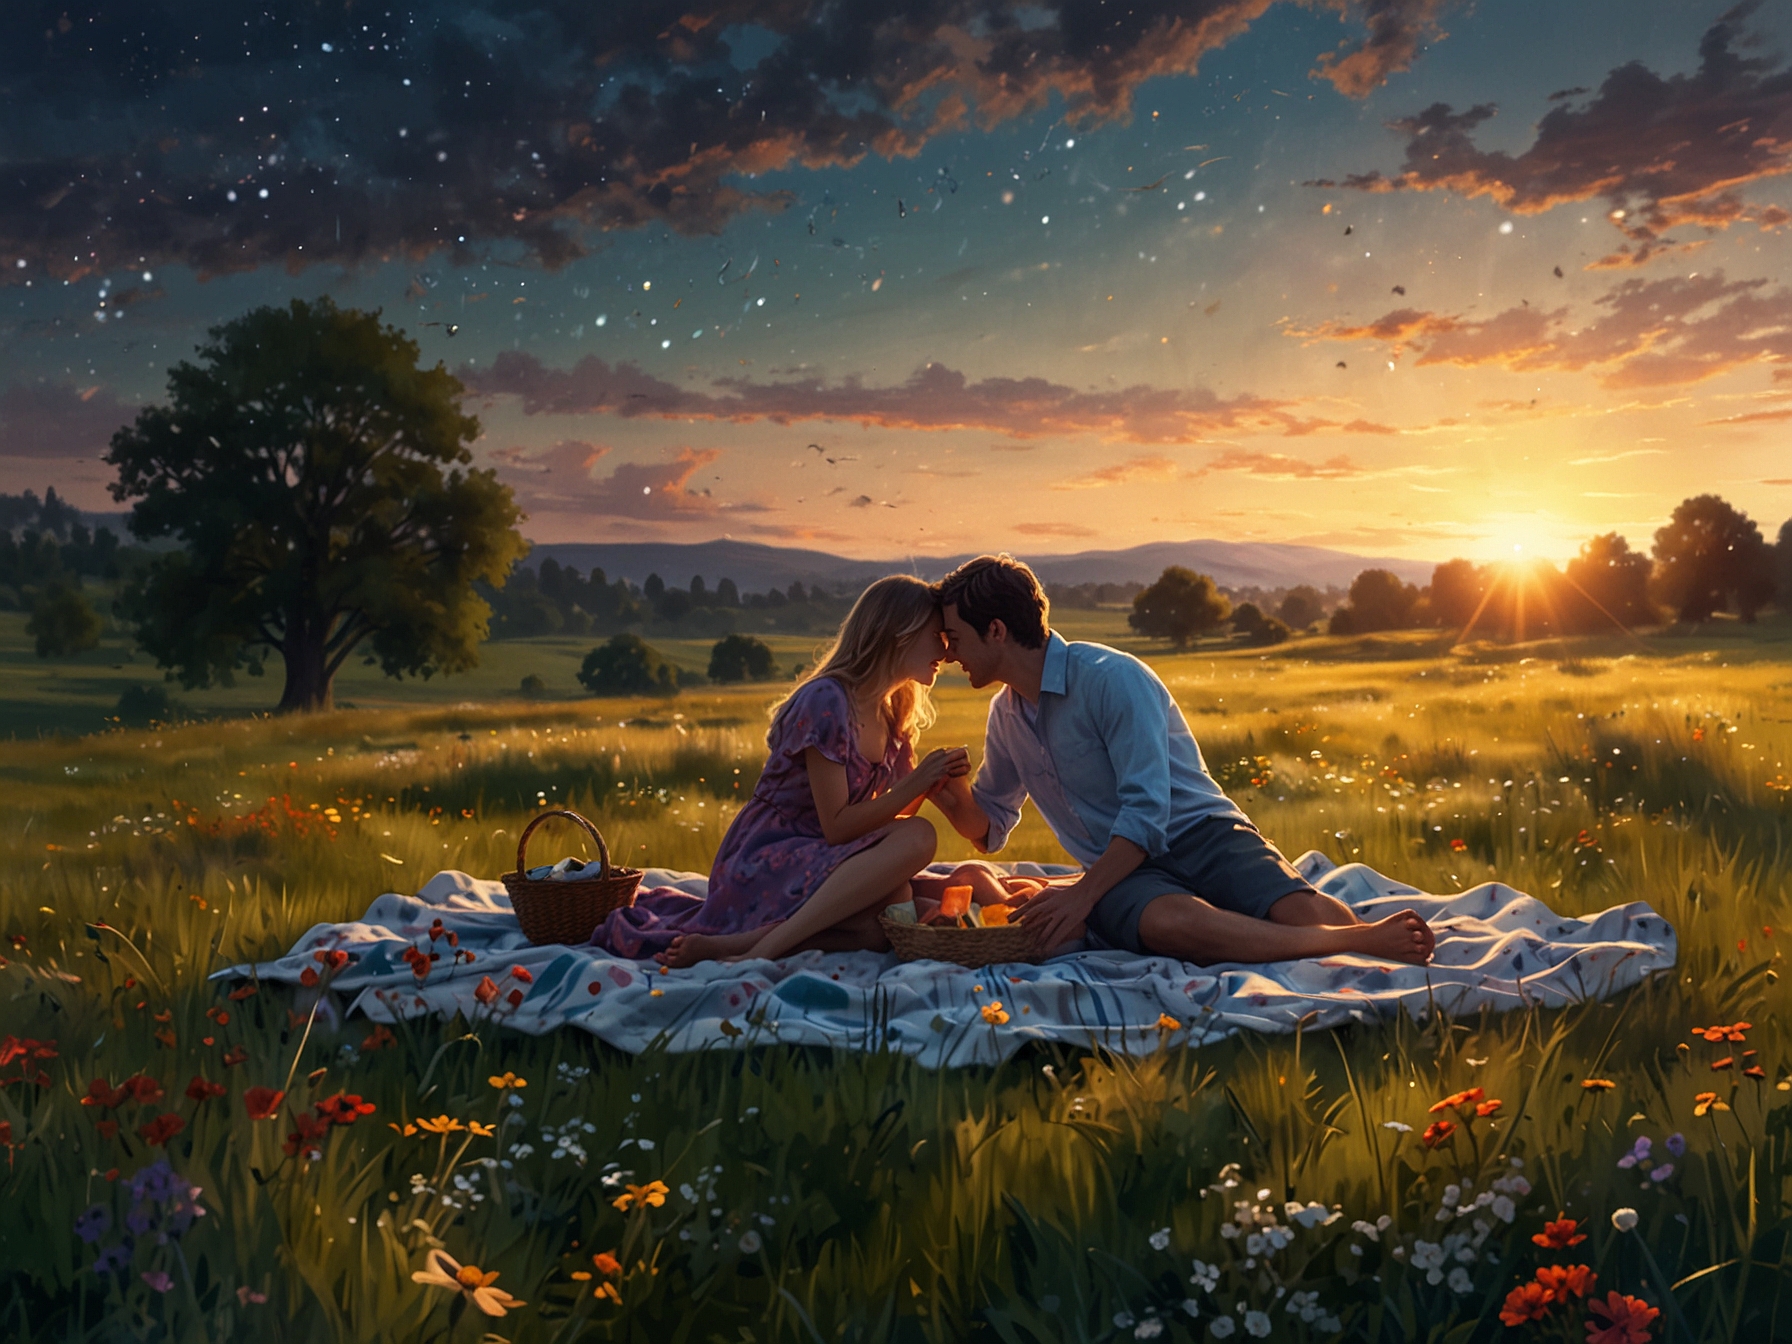 A magical meadow picnic scene showing a couple lying on a vibrant blanket amid blooming wildflowers, enjoying scones and lemonade, with fairy lights adding an enchanting atmosphere.